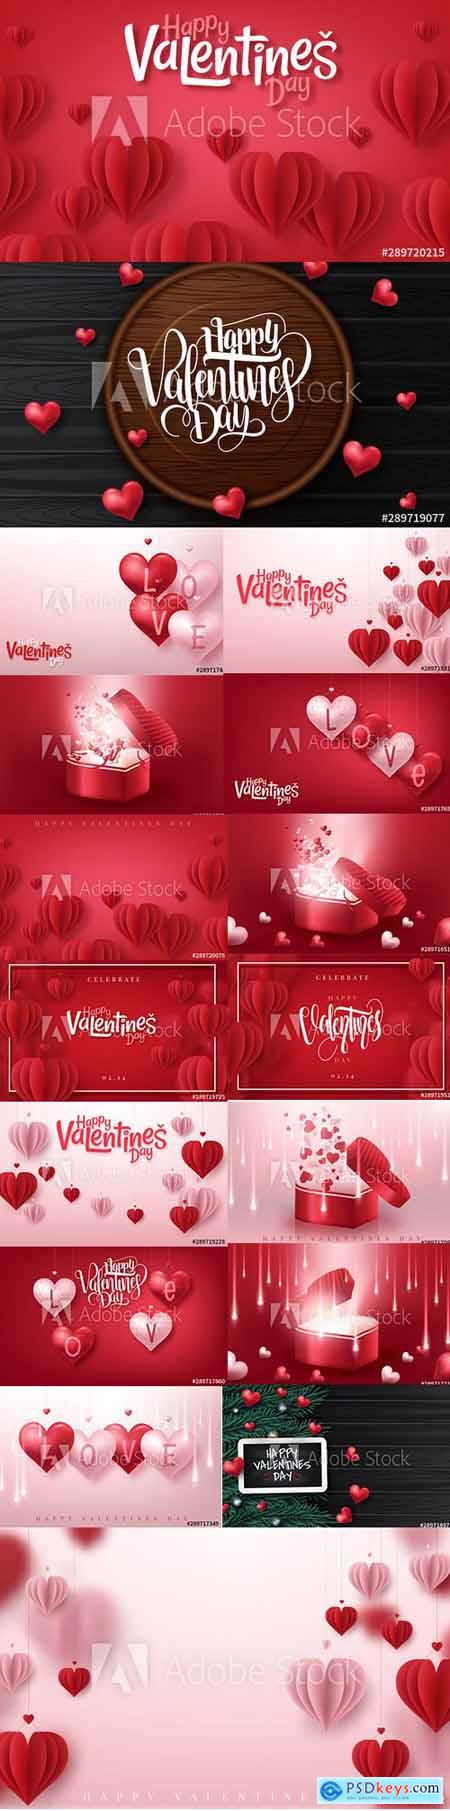 Colorful Happy Valentines Day Illustration with 3D hearts 3